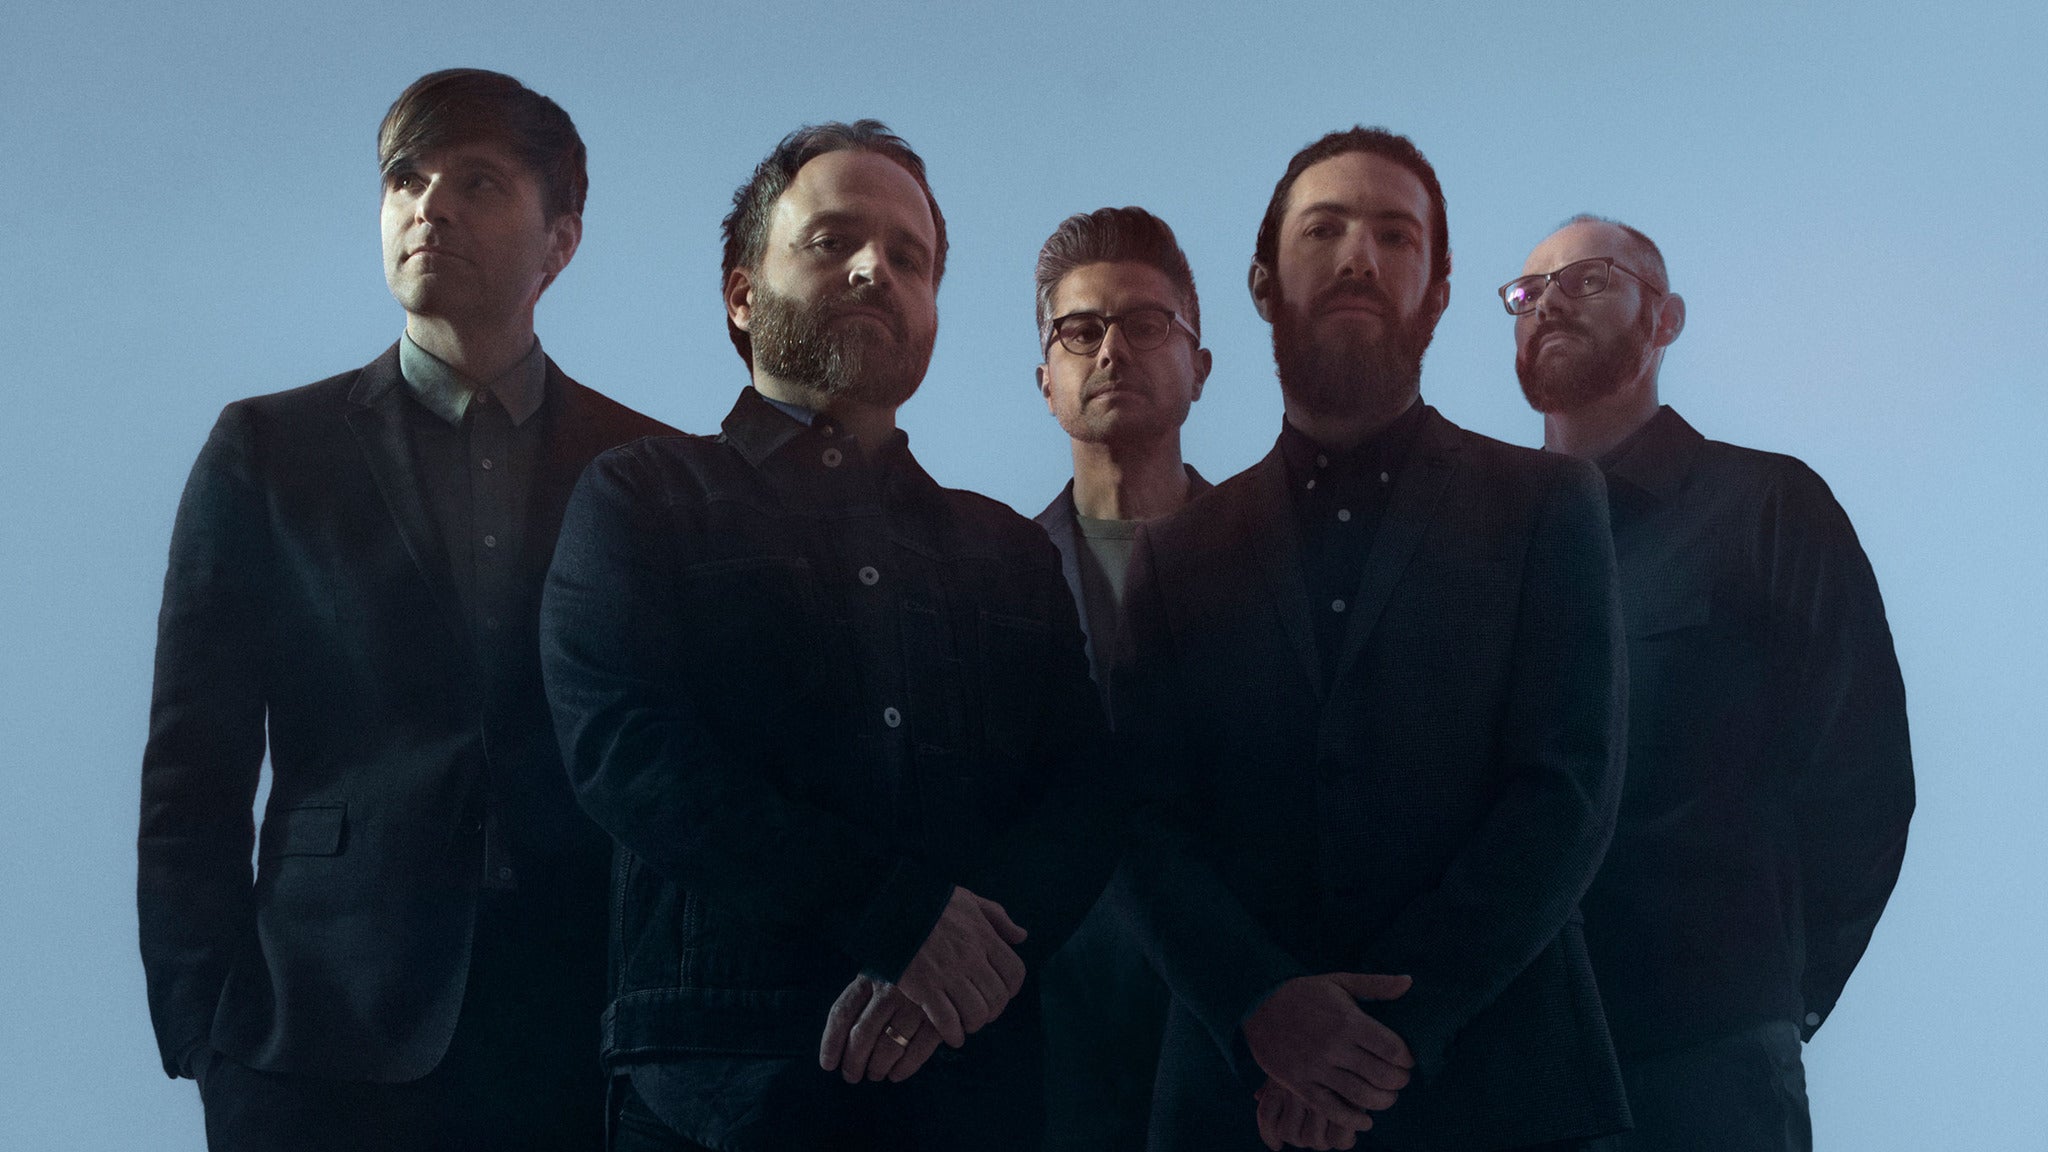 Death Cab for Cutie in Bend promo photo for Spotify presale offer code